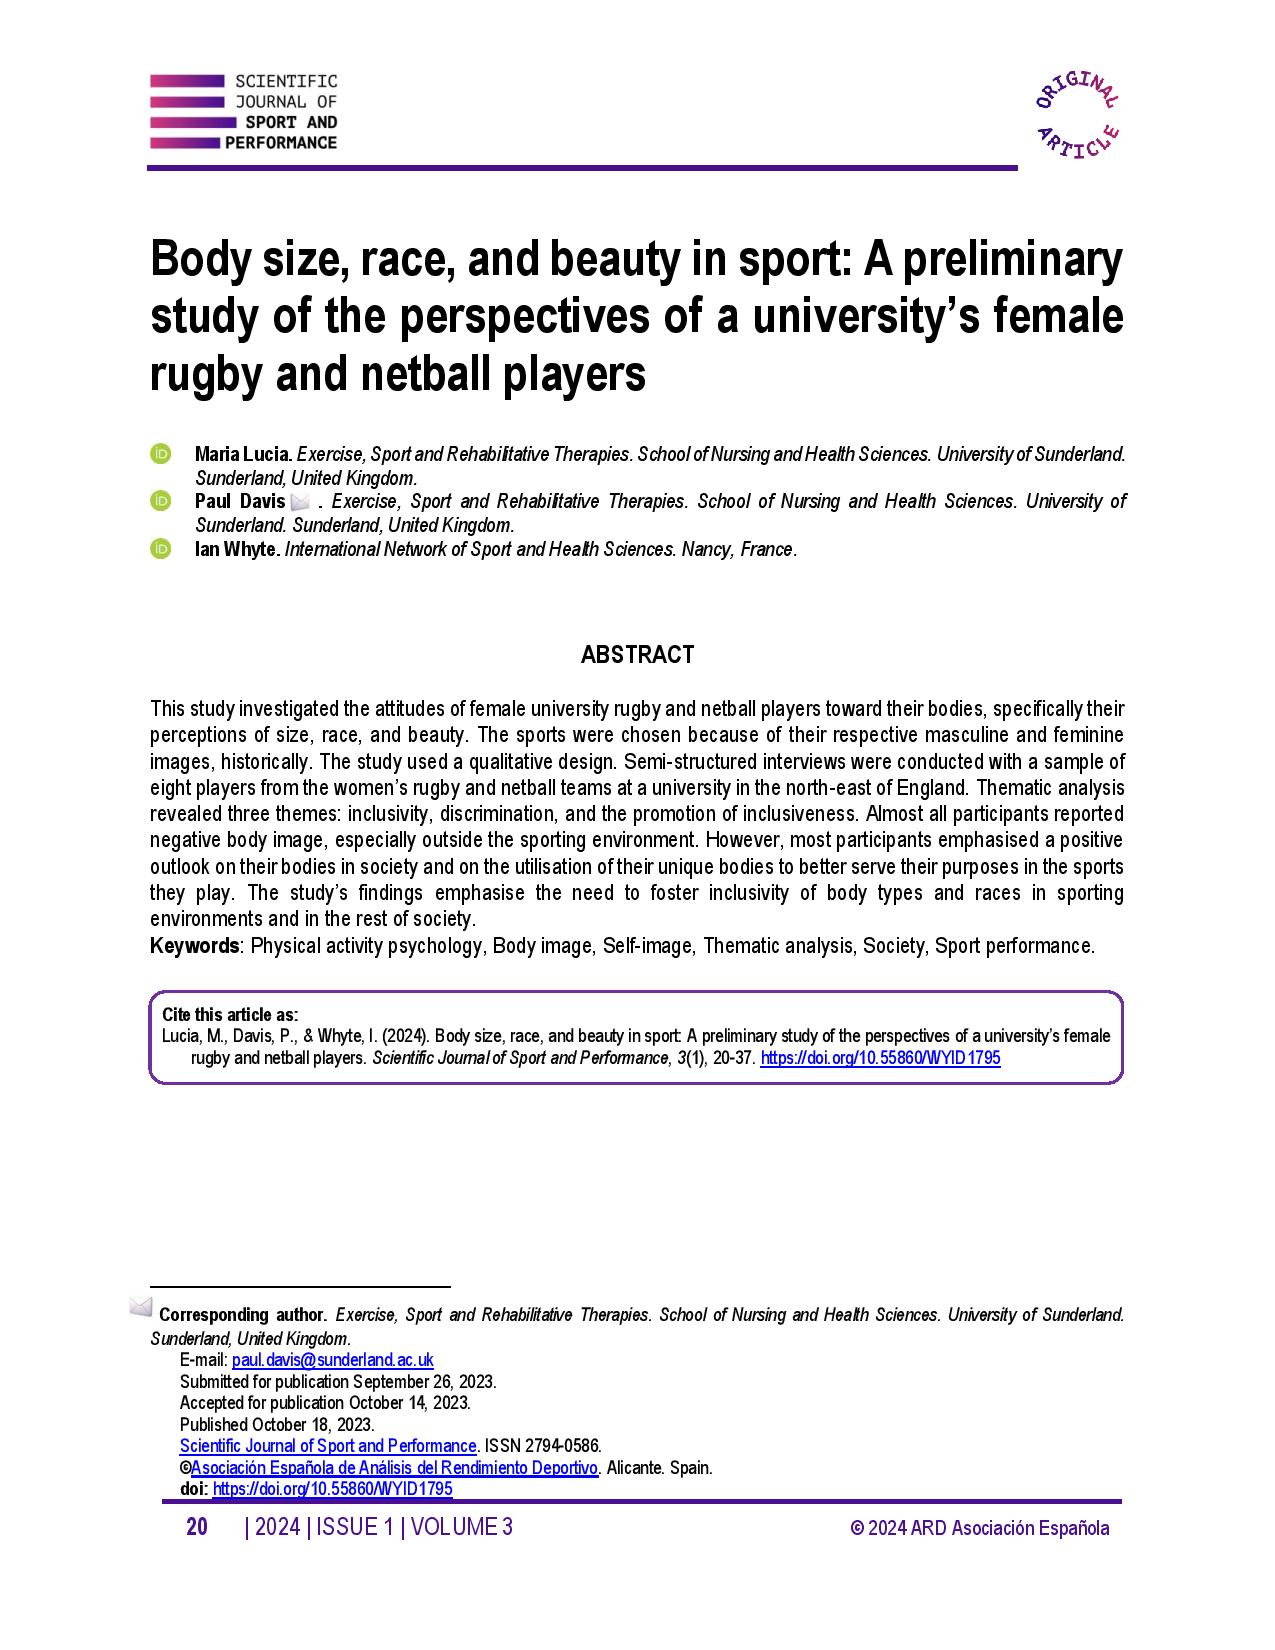 Body size, race, and beauty in sport: A preliminary study of the perspectives of a university’s female rugby and netball players